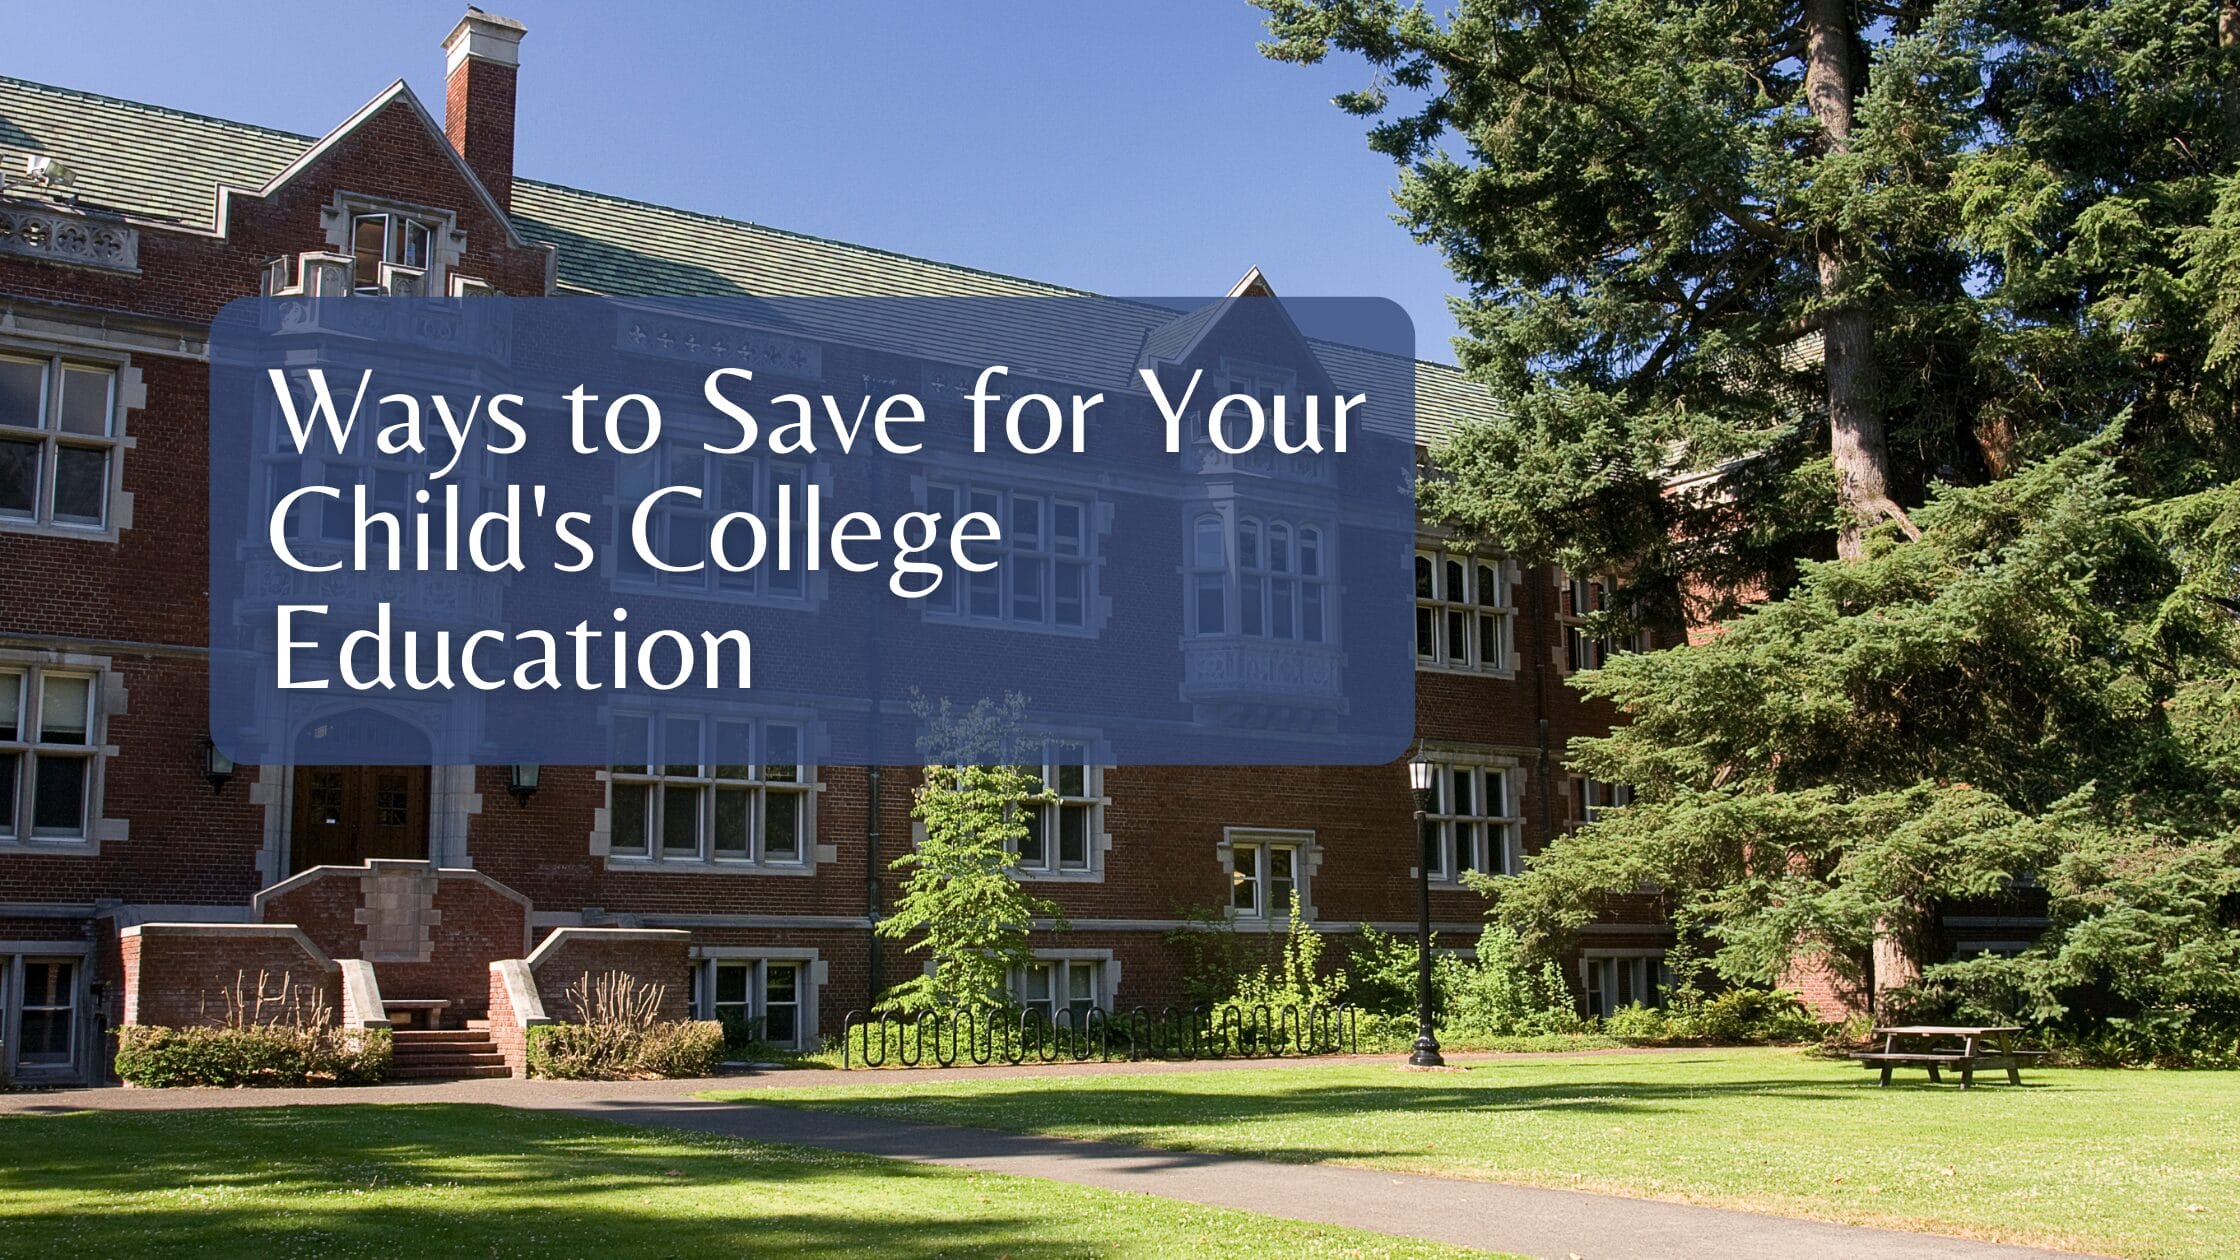 Ways to Save for Your Child’s College Education